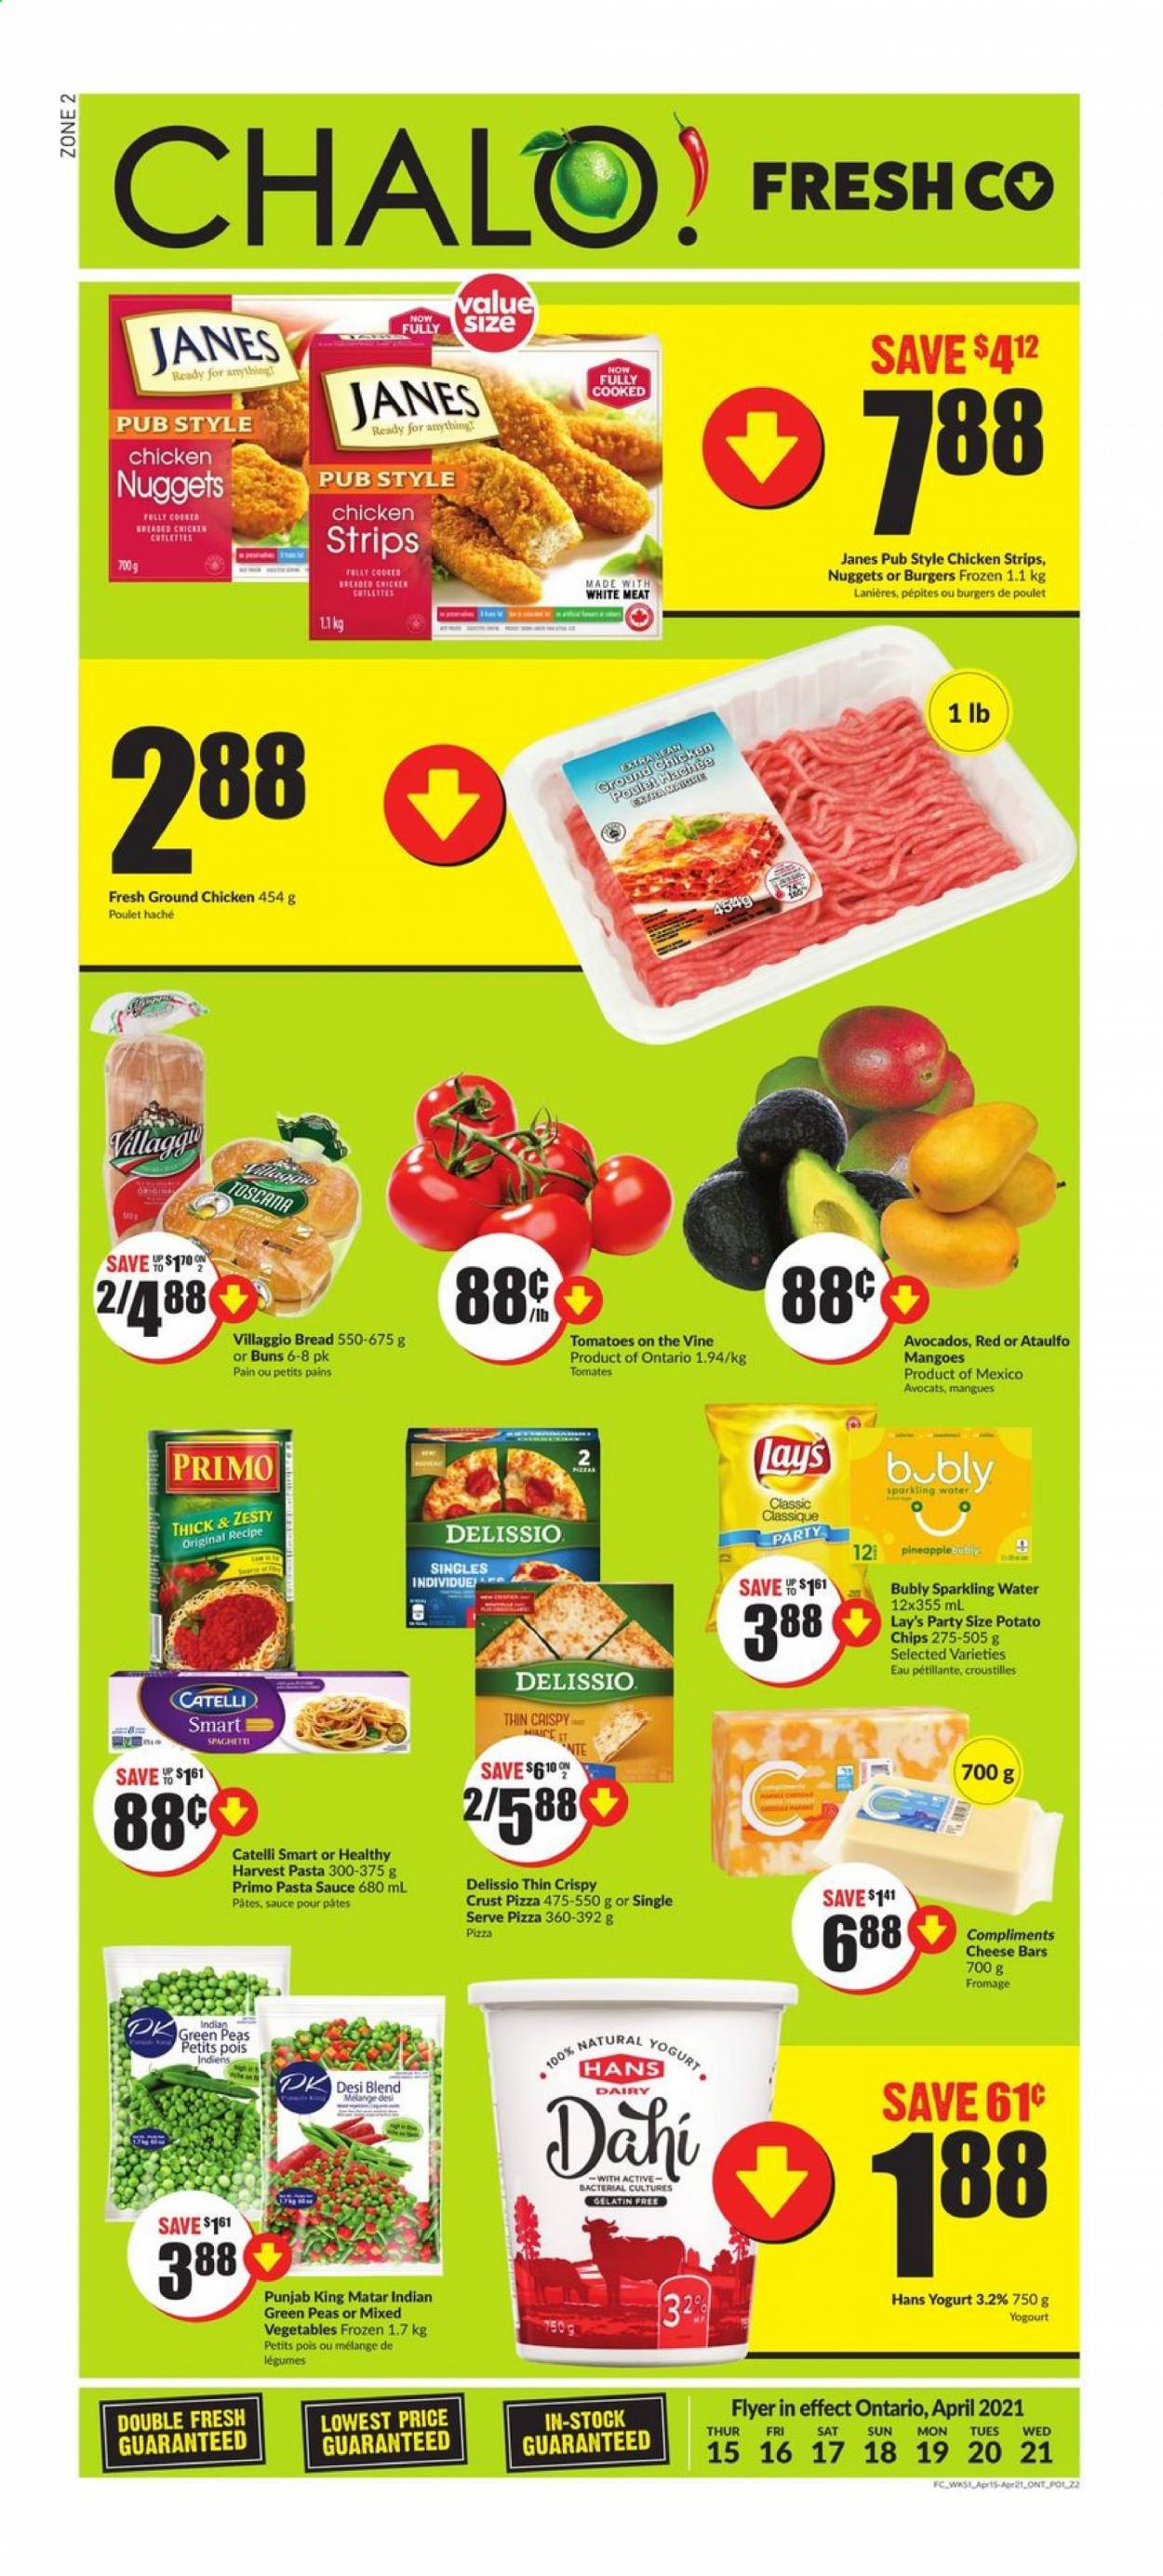 thumbnail - Chalo! FreshCo. Flyer - April 15, 2021 - April 21, 2021 - Sales products - bread, buns, avocado, mango, spaghetti, pizza, pasta sauce, nuggets, sauce, chicken nuggets, Harvest Pasta, yoghurt, mixed vegetables, strips, chicken strips, potato chips, Lay’s, sparkling water, ground chicken, chicken, gelatin. Page 1.